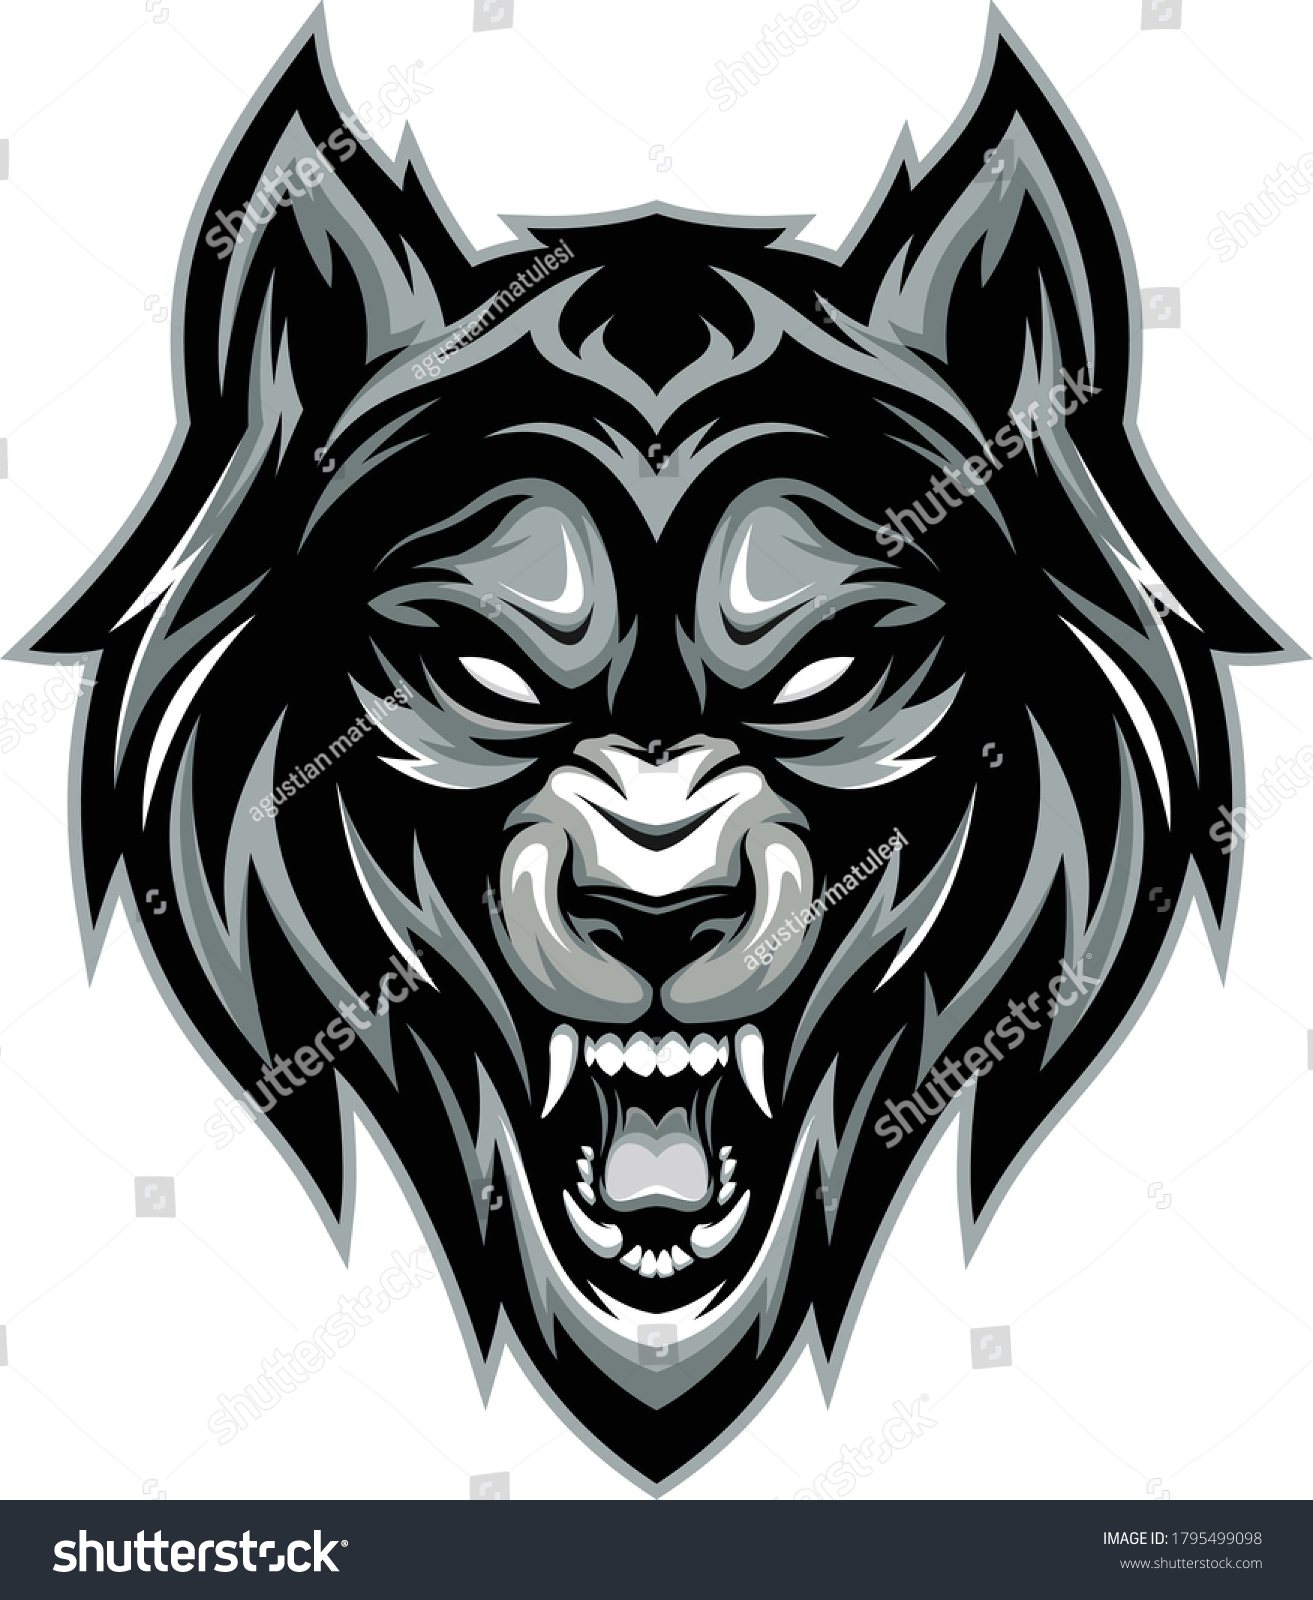 Vector image of angry wolf head - Royalty Free Stock Vector 1795499098 ...